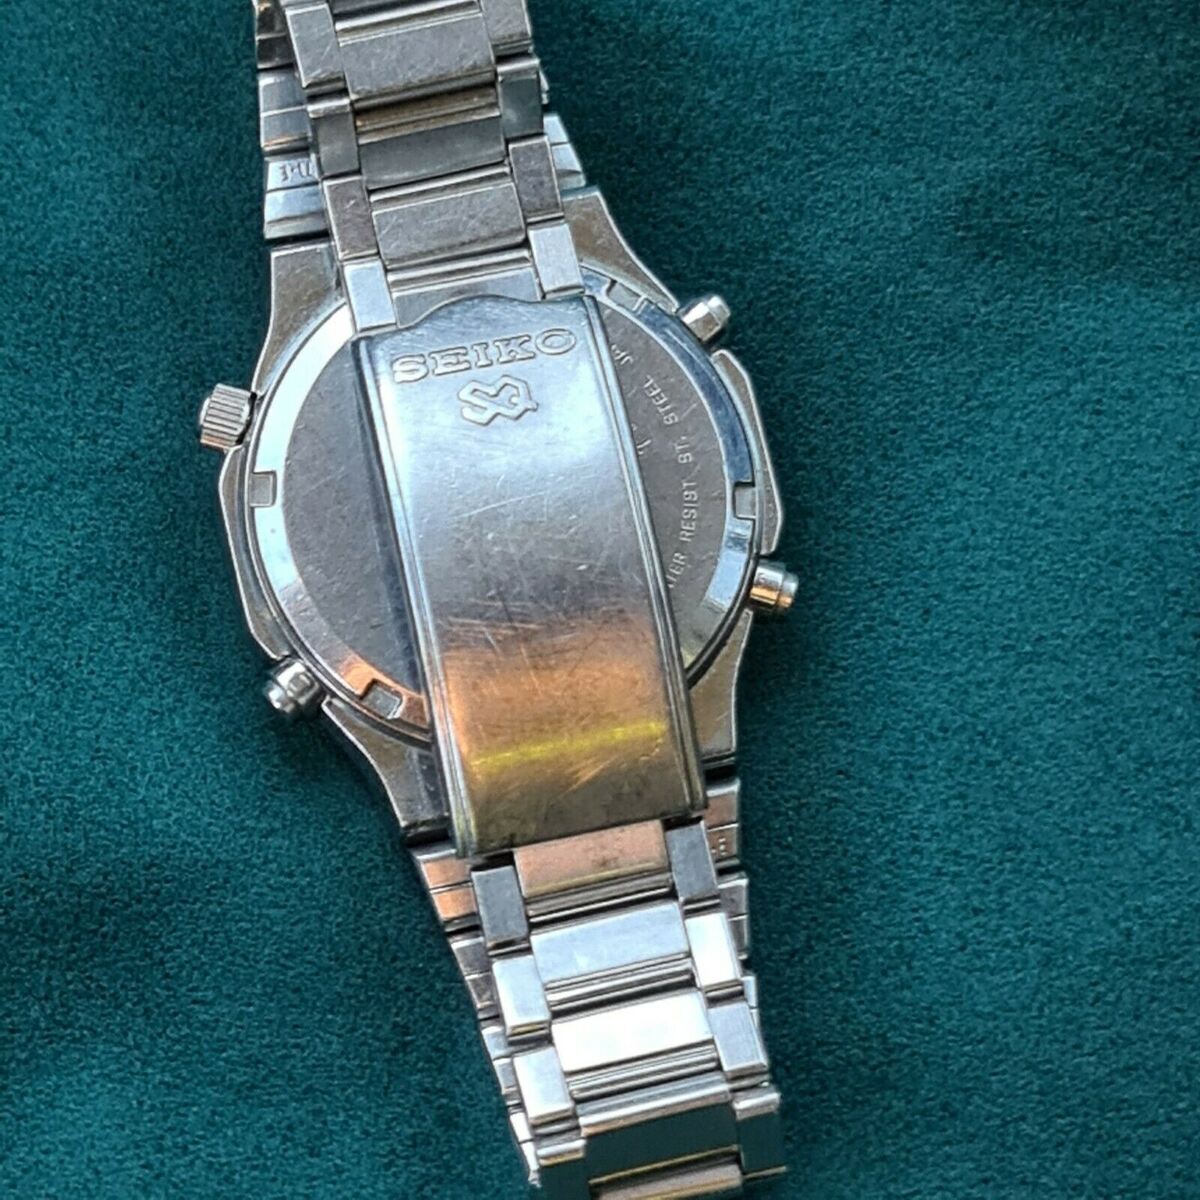 rsz_7a38-7020-stainless-grey-ebay-may2021-6.jpg